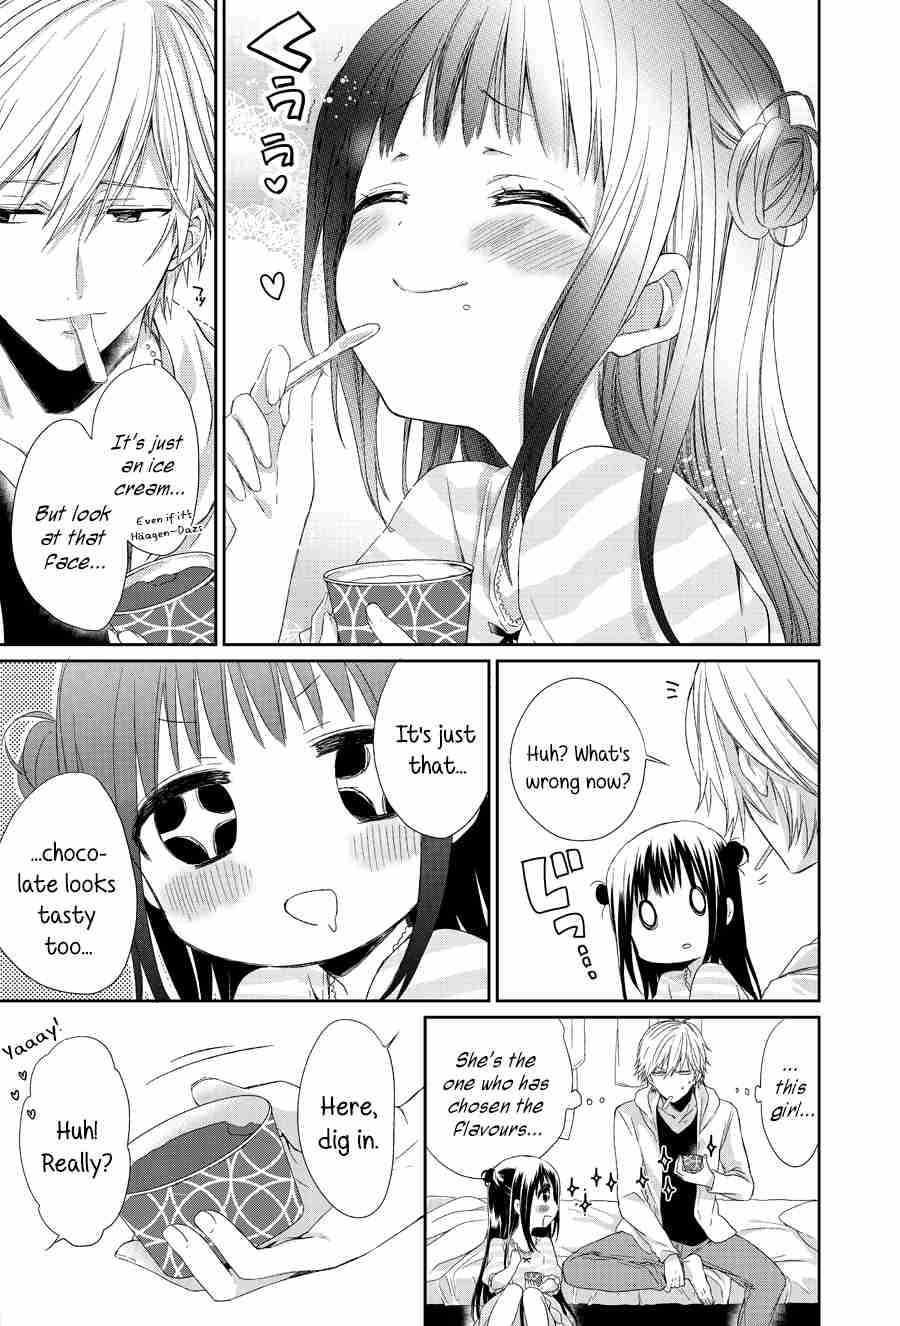 She's Not My Girlfriend! We're Just Childhood Friends Ch. 3